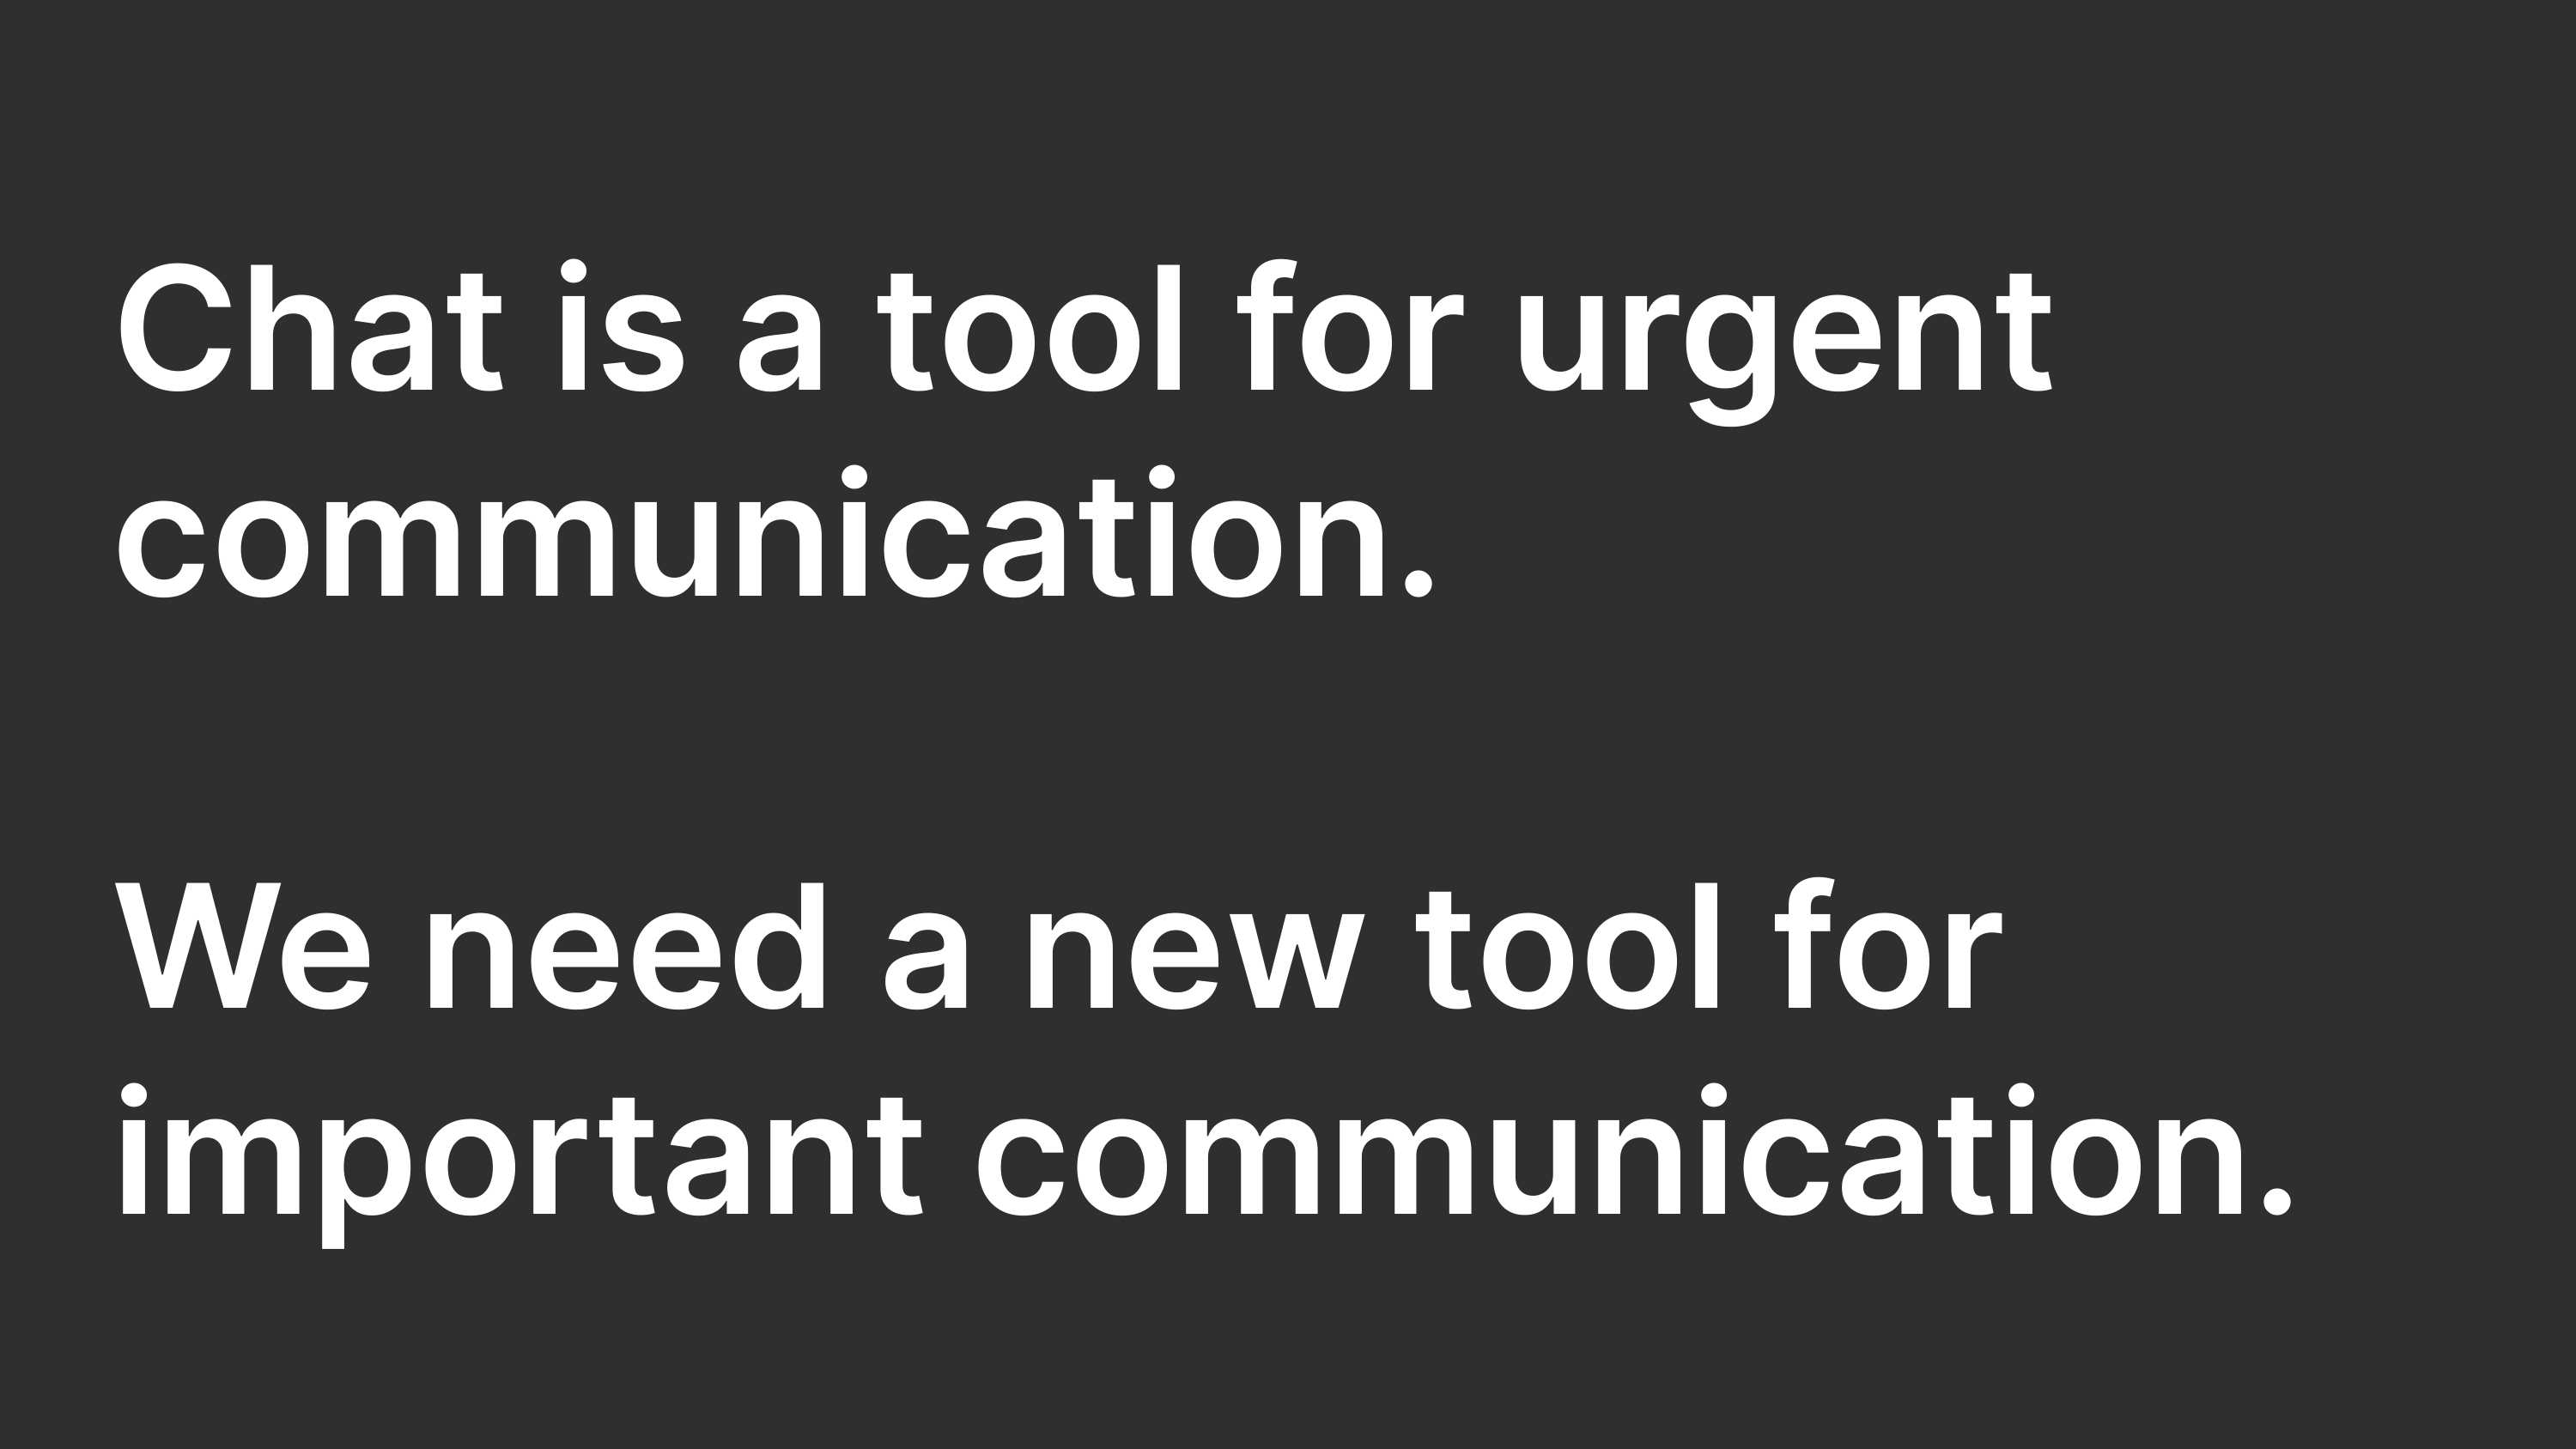 Chat is a tool for urgent communication. We need a new tool for important communication.